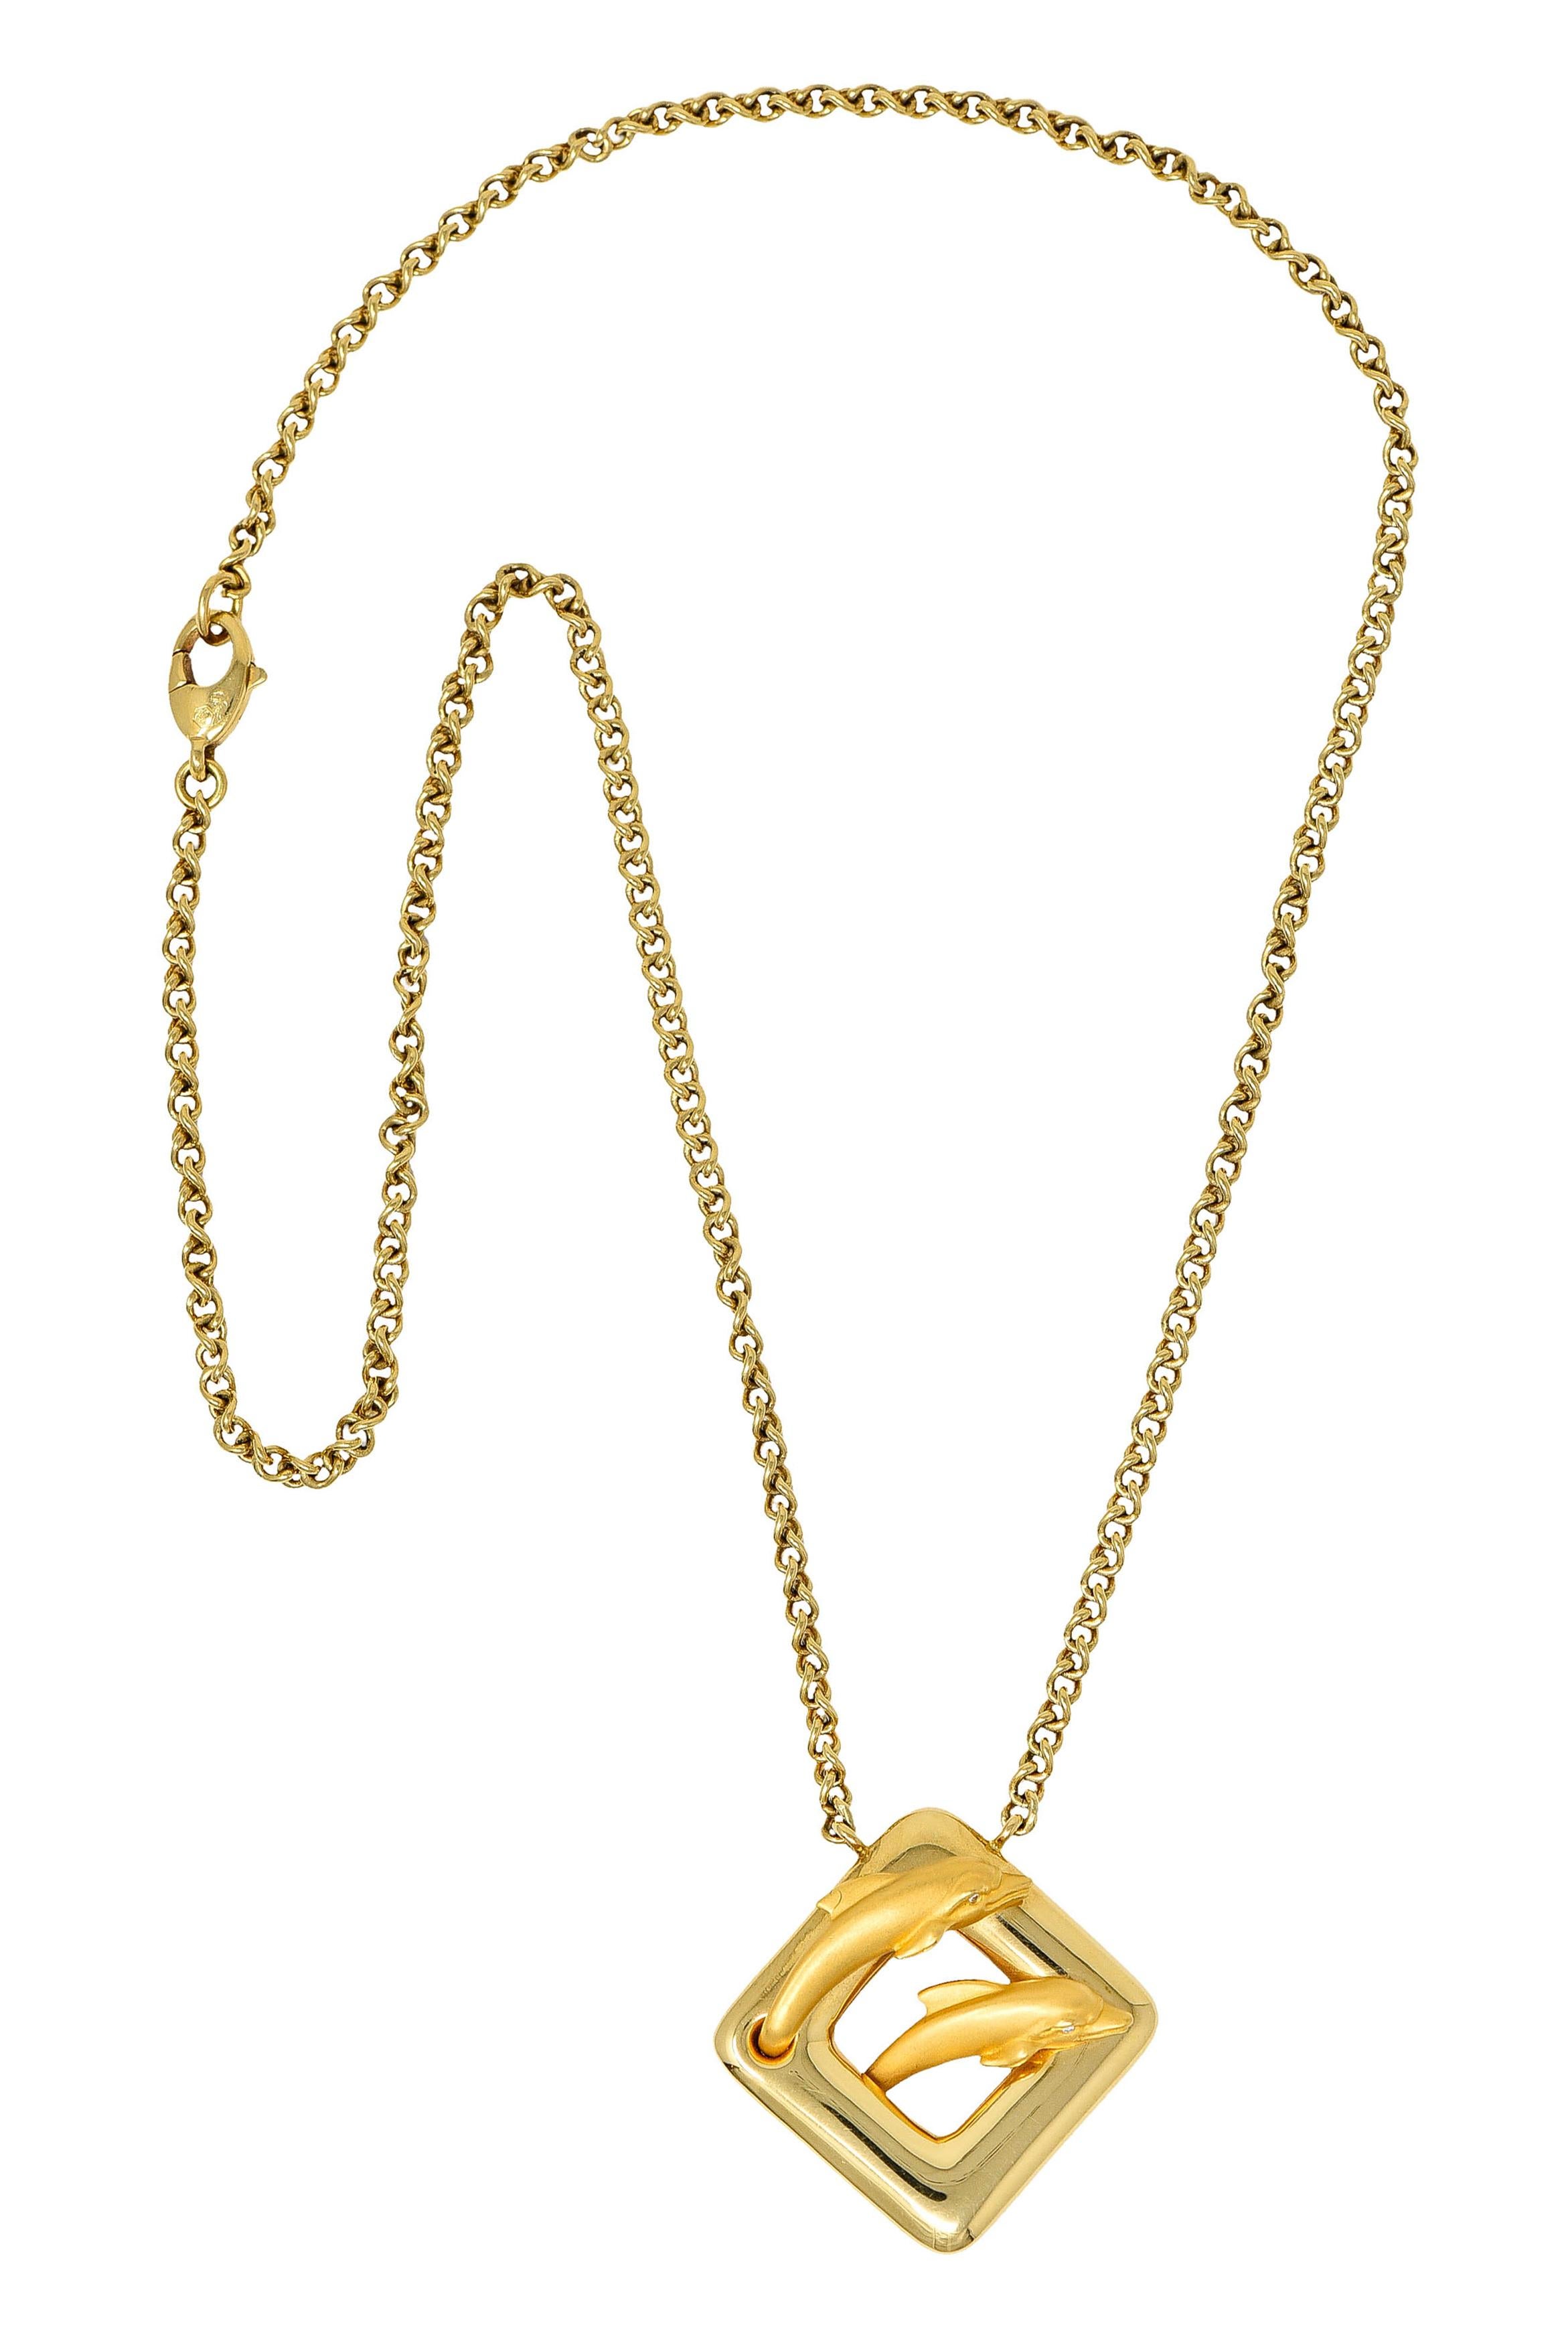 Curb chain necklace centers a brightly polished cushion shaped station

Featuring two matte finished and highly rendered dolphins with diamond accent eyes

Completed by a lobster clasp

Station and chain are stamped 750 for 18 karat gold

Both have